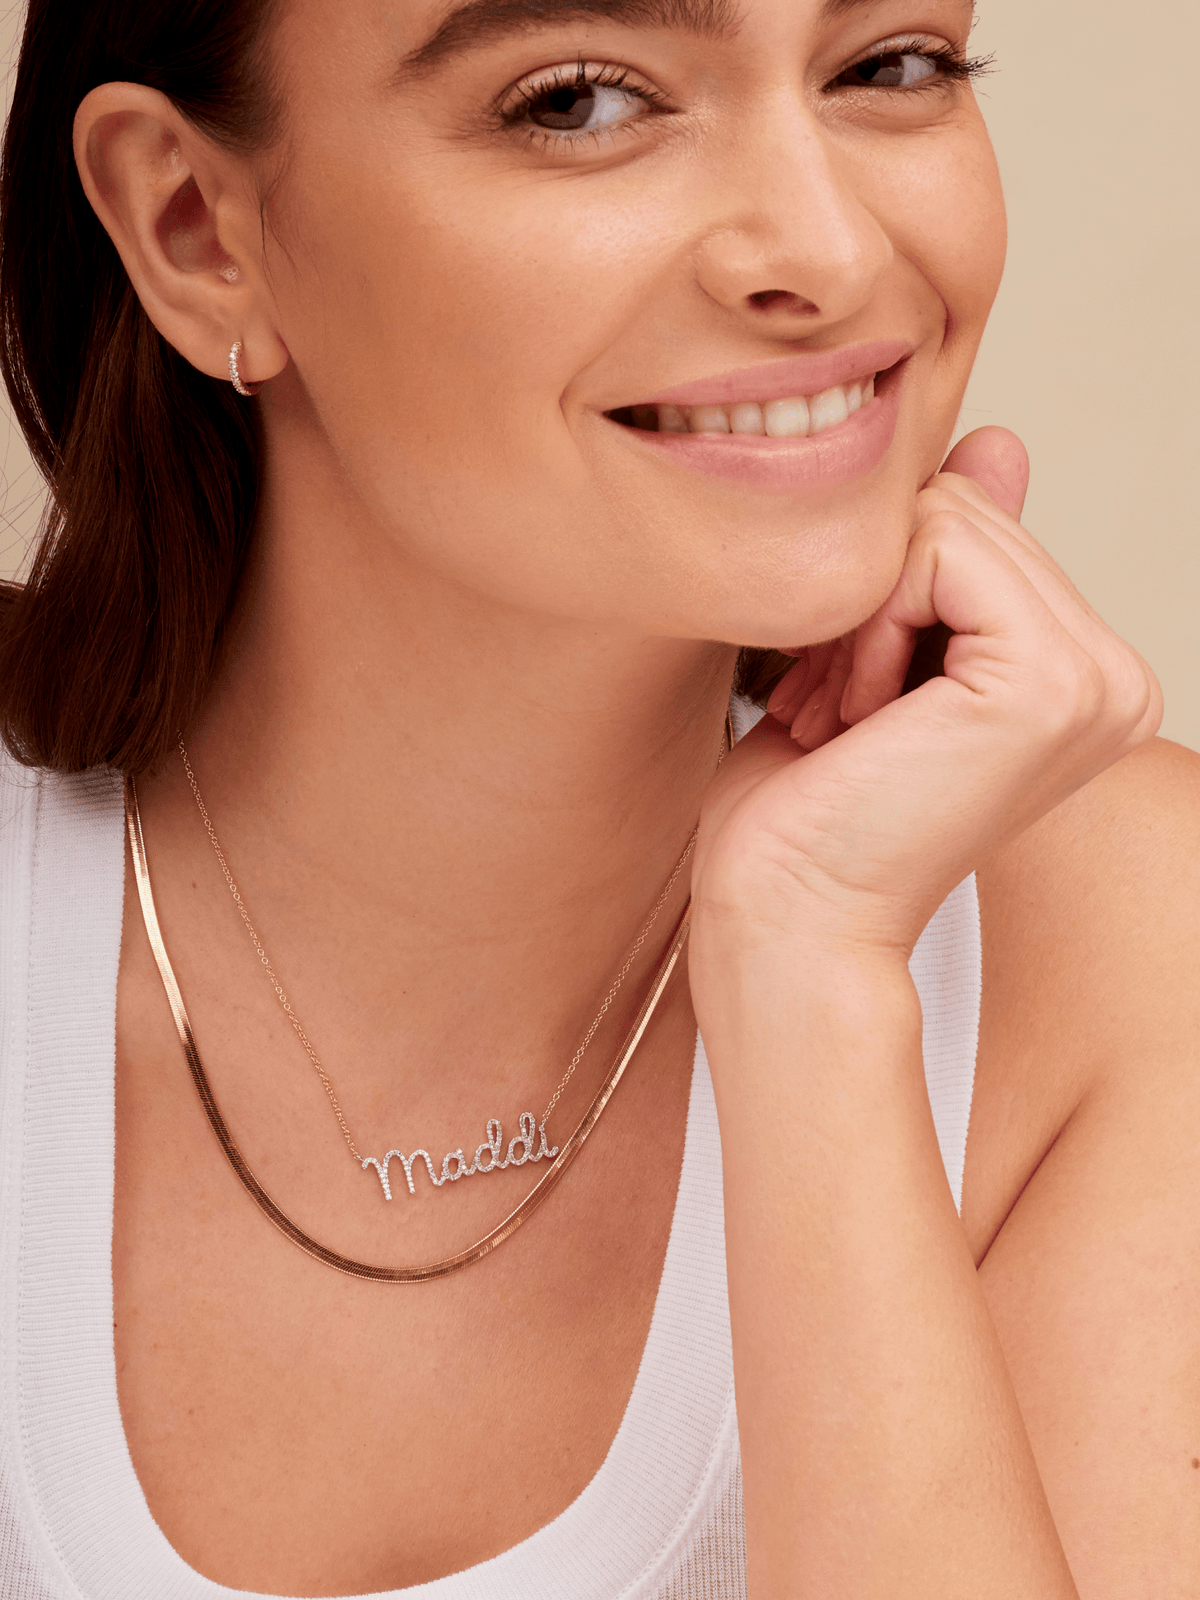 Snake chain with diamond name necklace